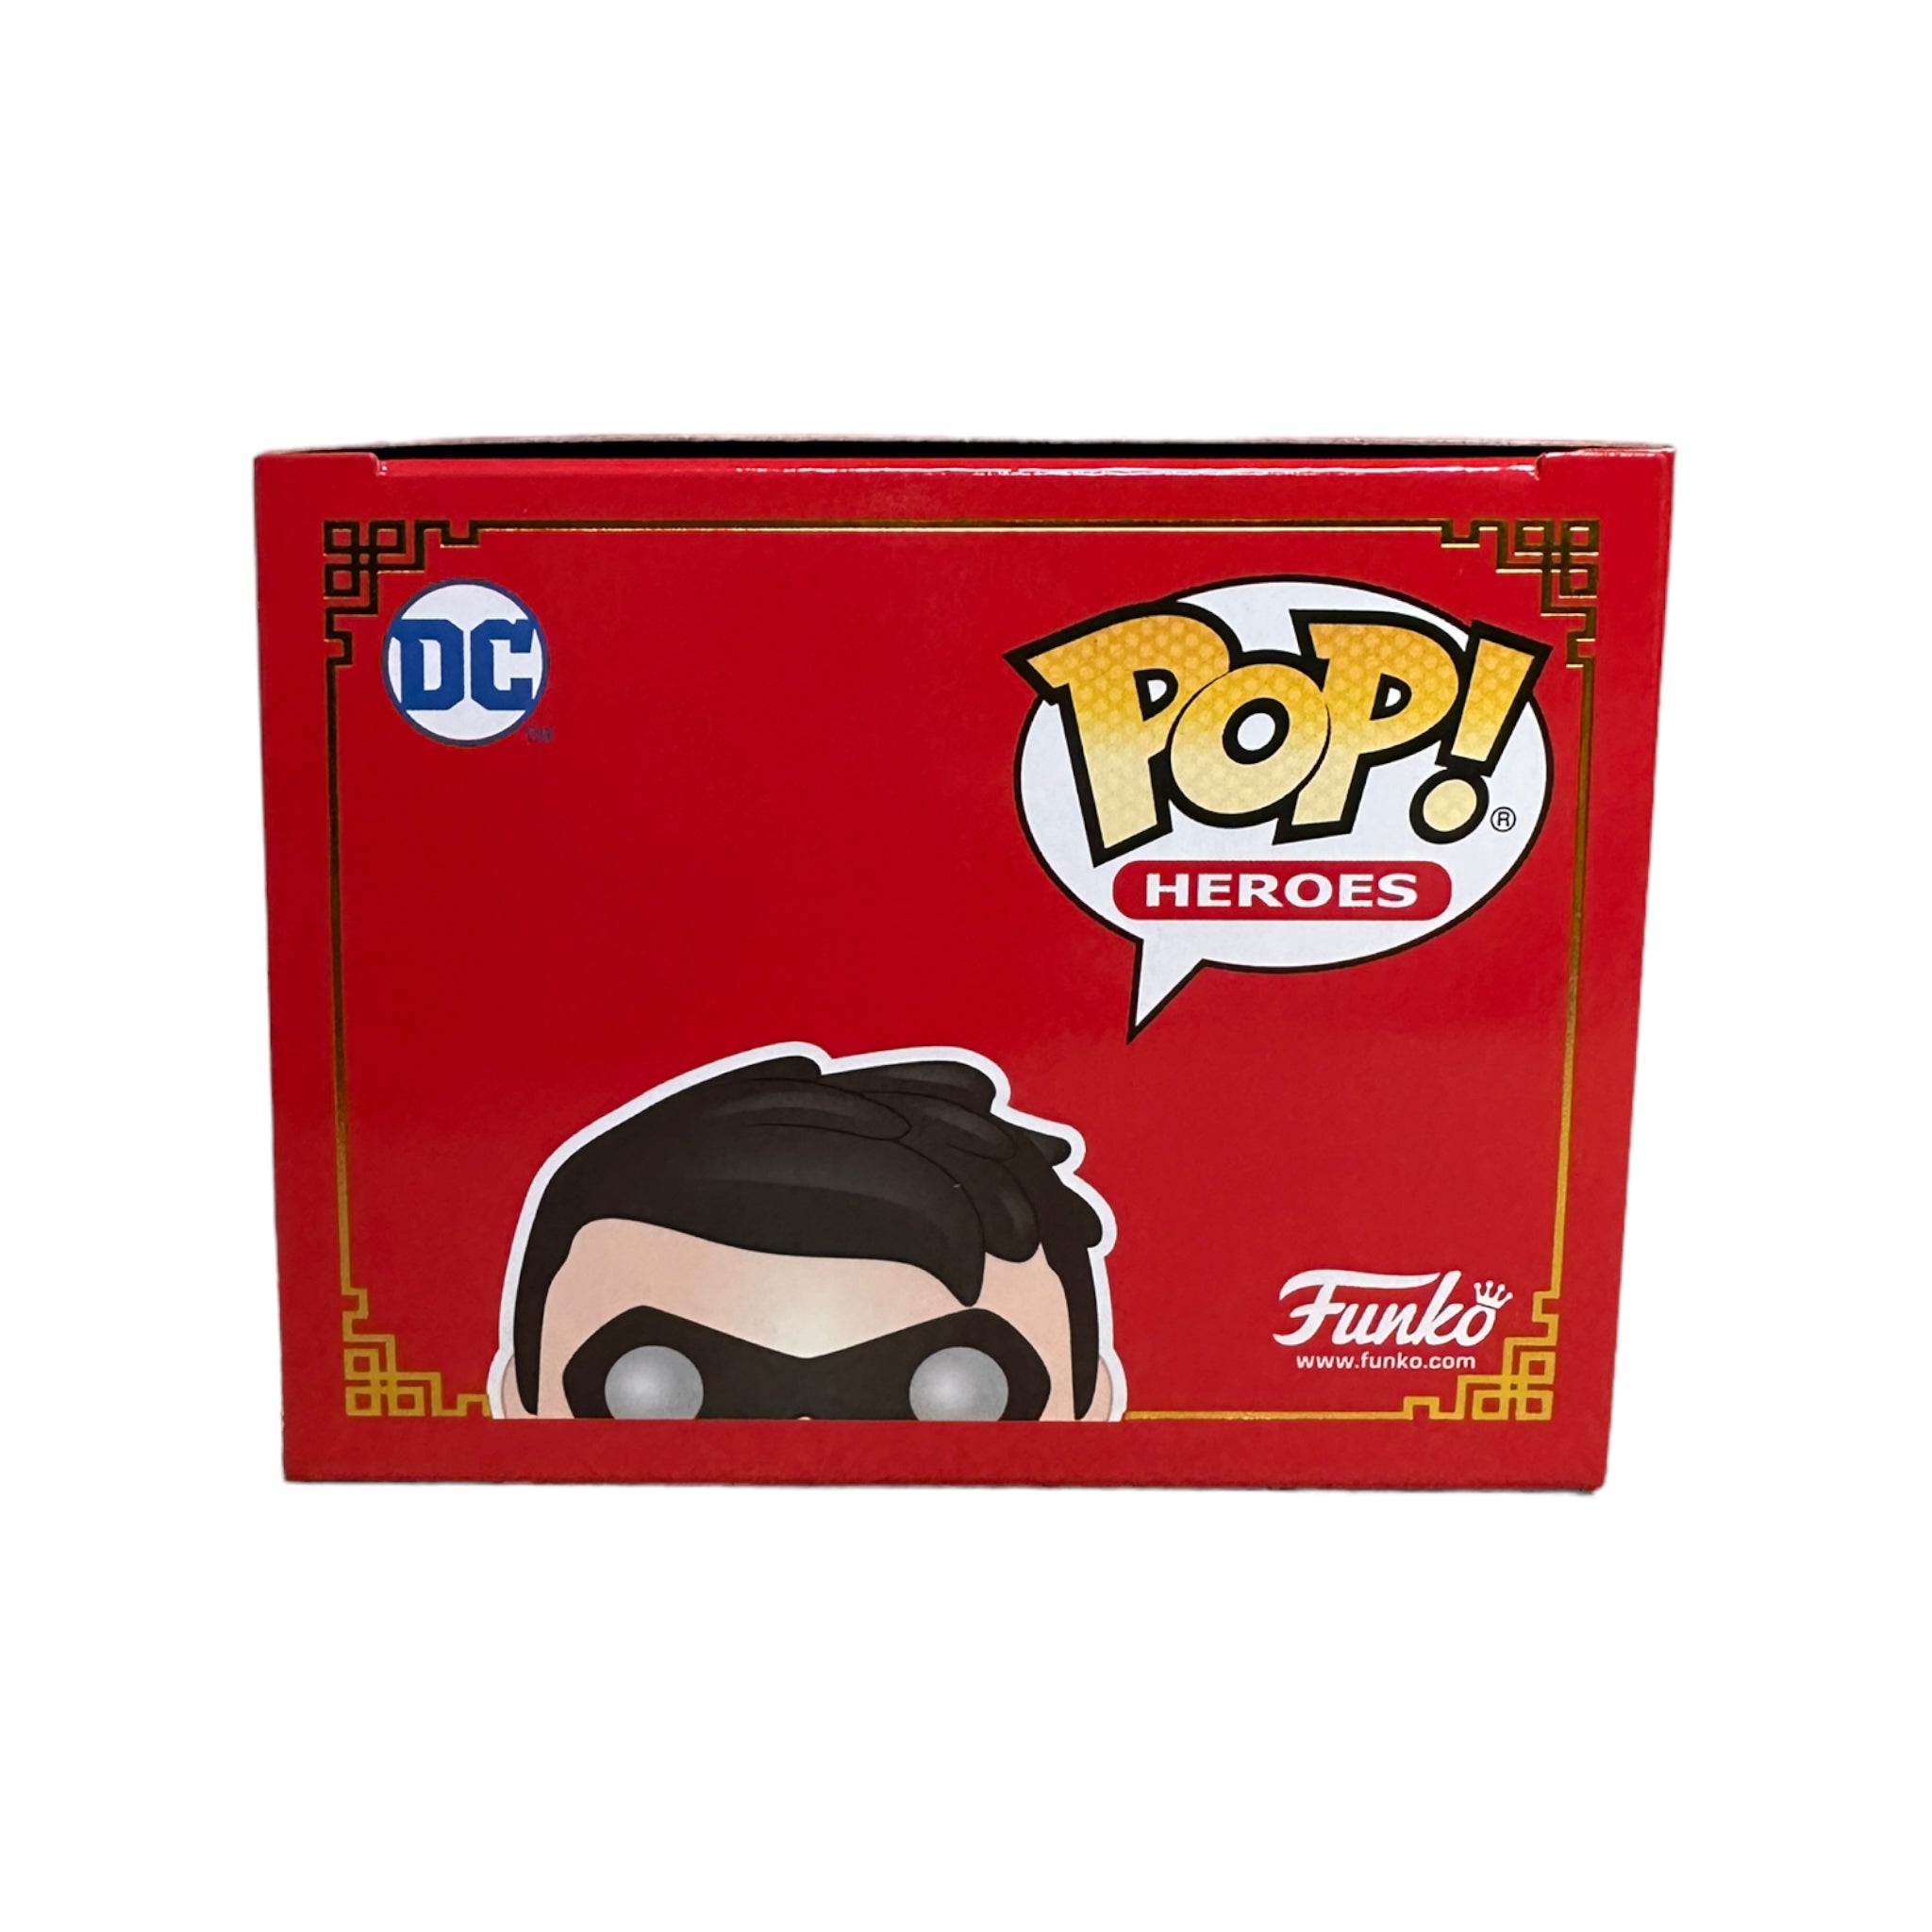 Robin (Patina) #377 (Hooded Chase) Funko Pop! - DC Imperial Palace - Chinajoy Expo 2021 Exclusive - Condition 9/10